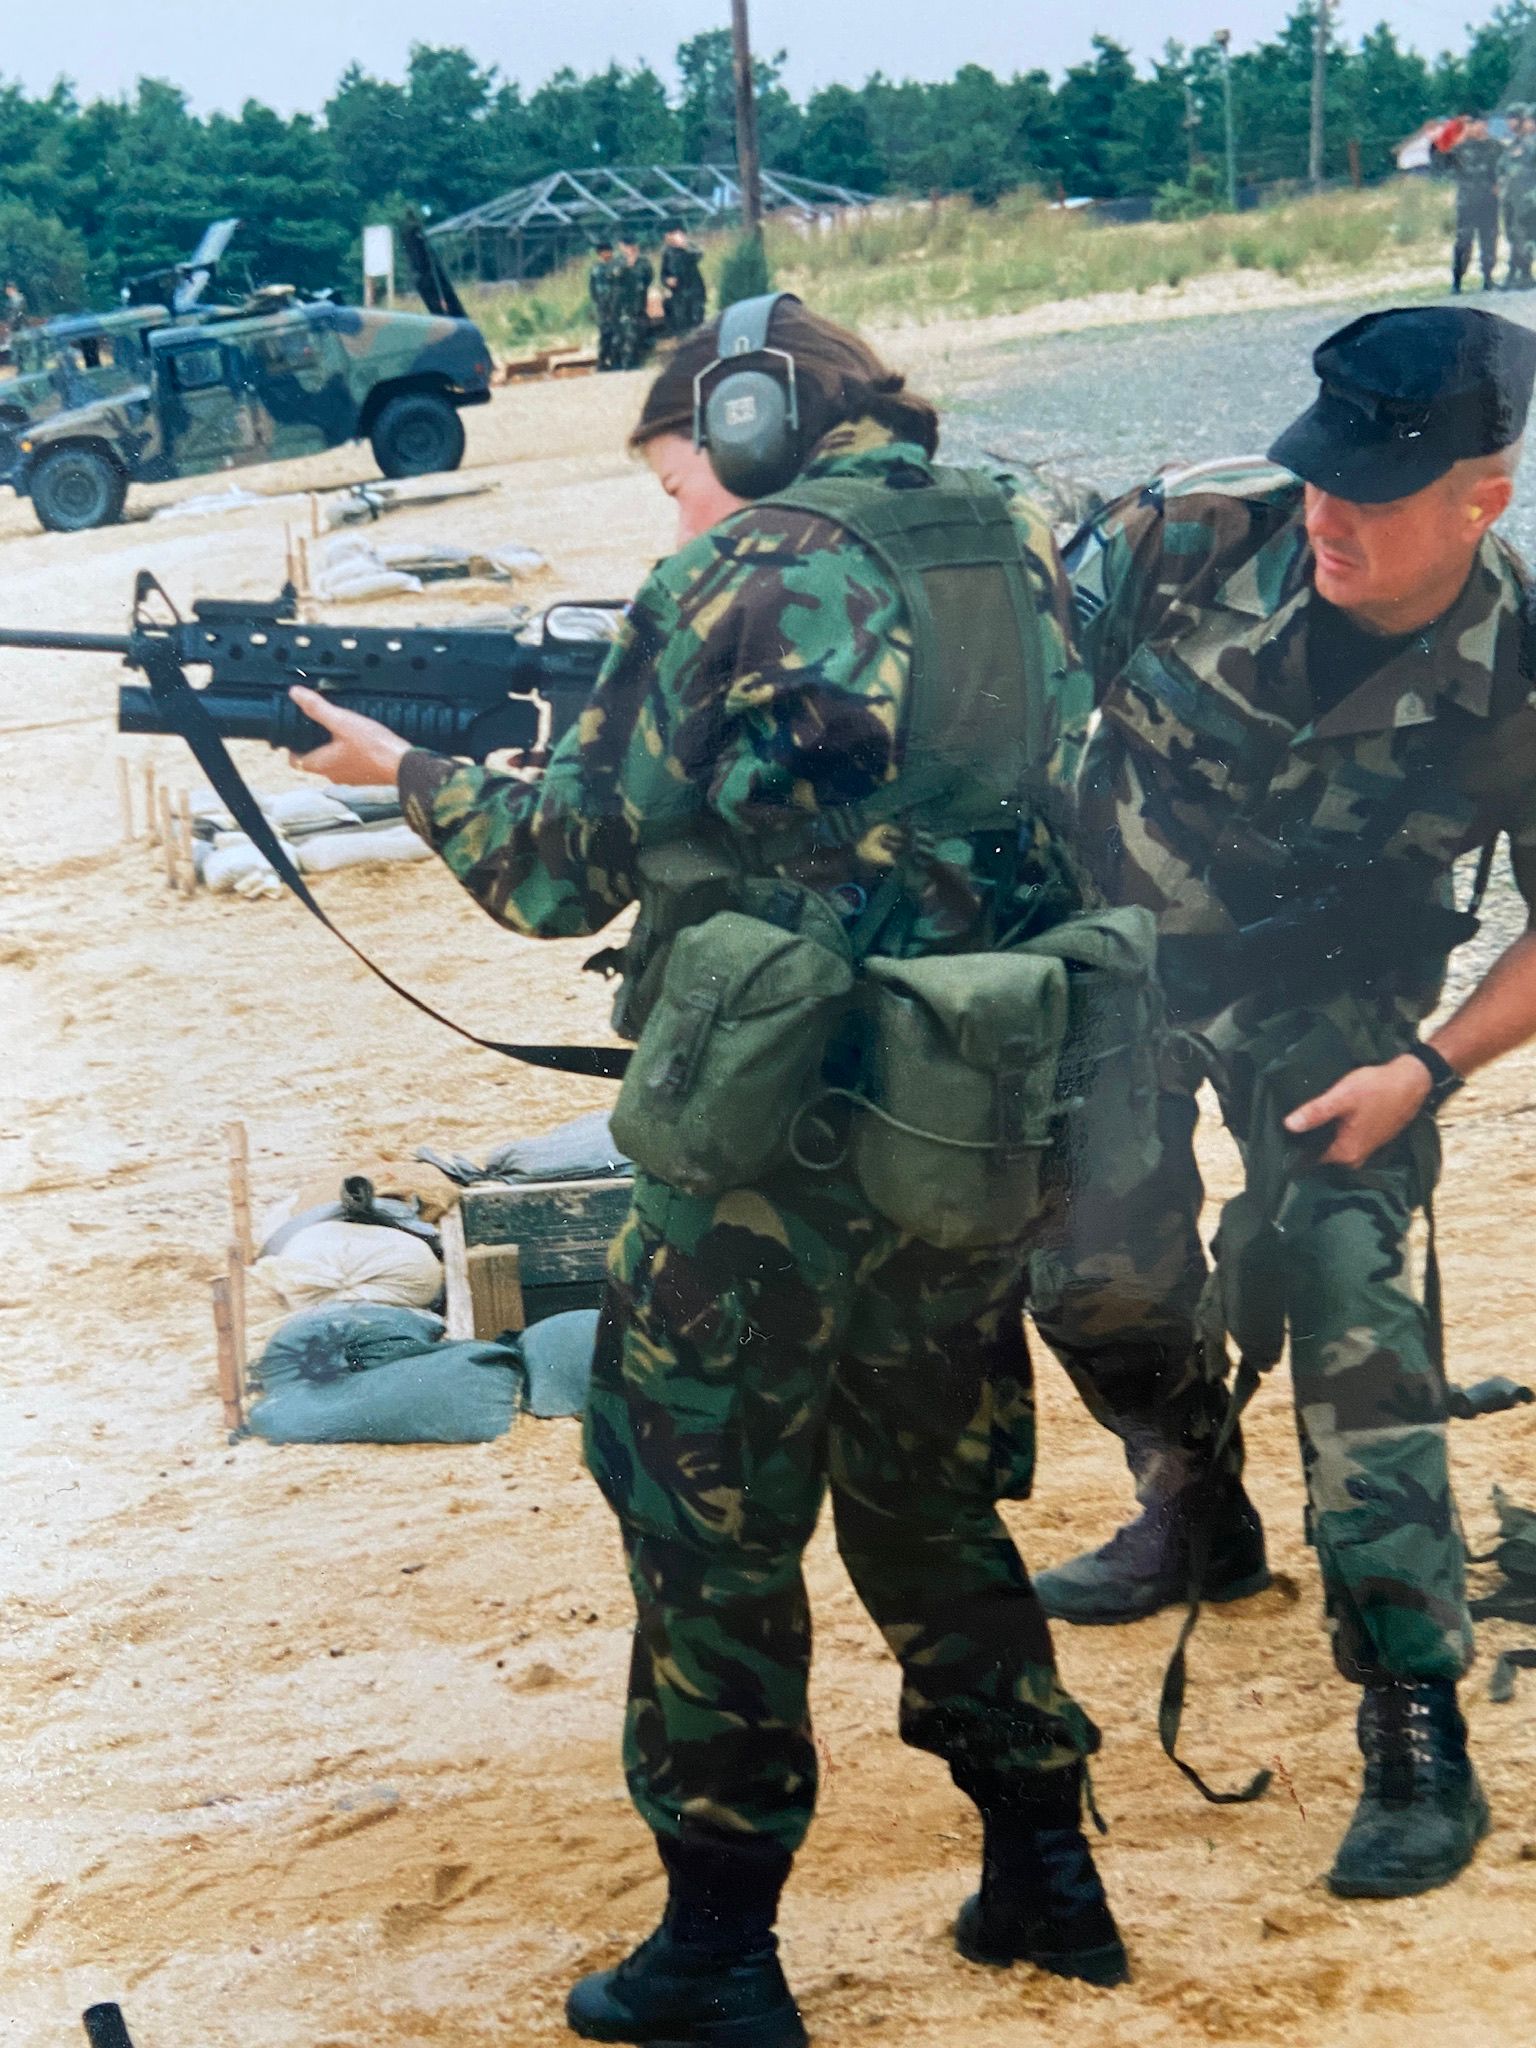 Image shows training camp with RAF aviator aiming a rifle and gunner vehicles.